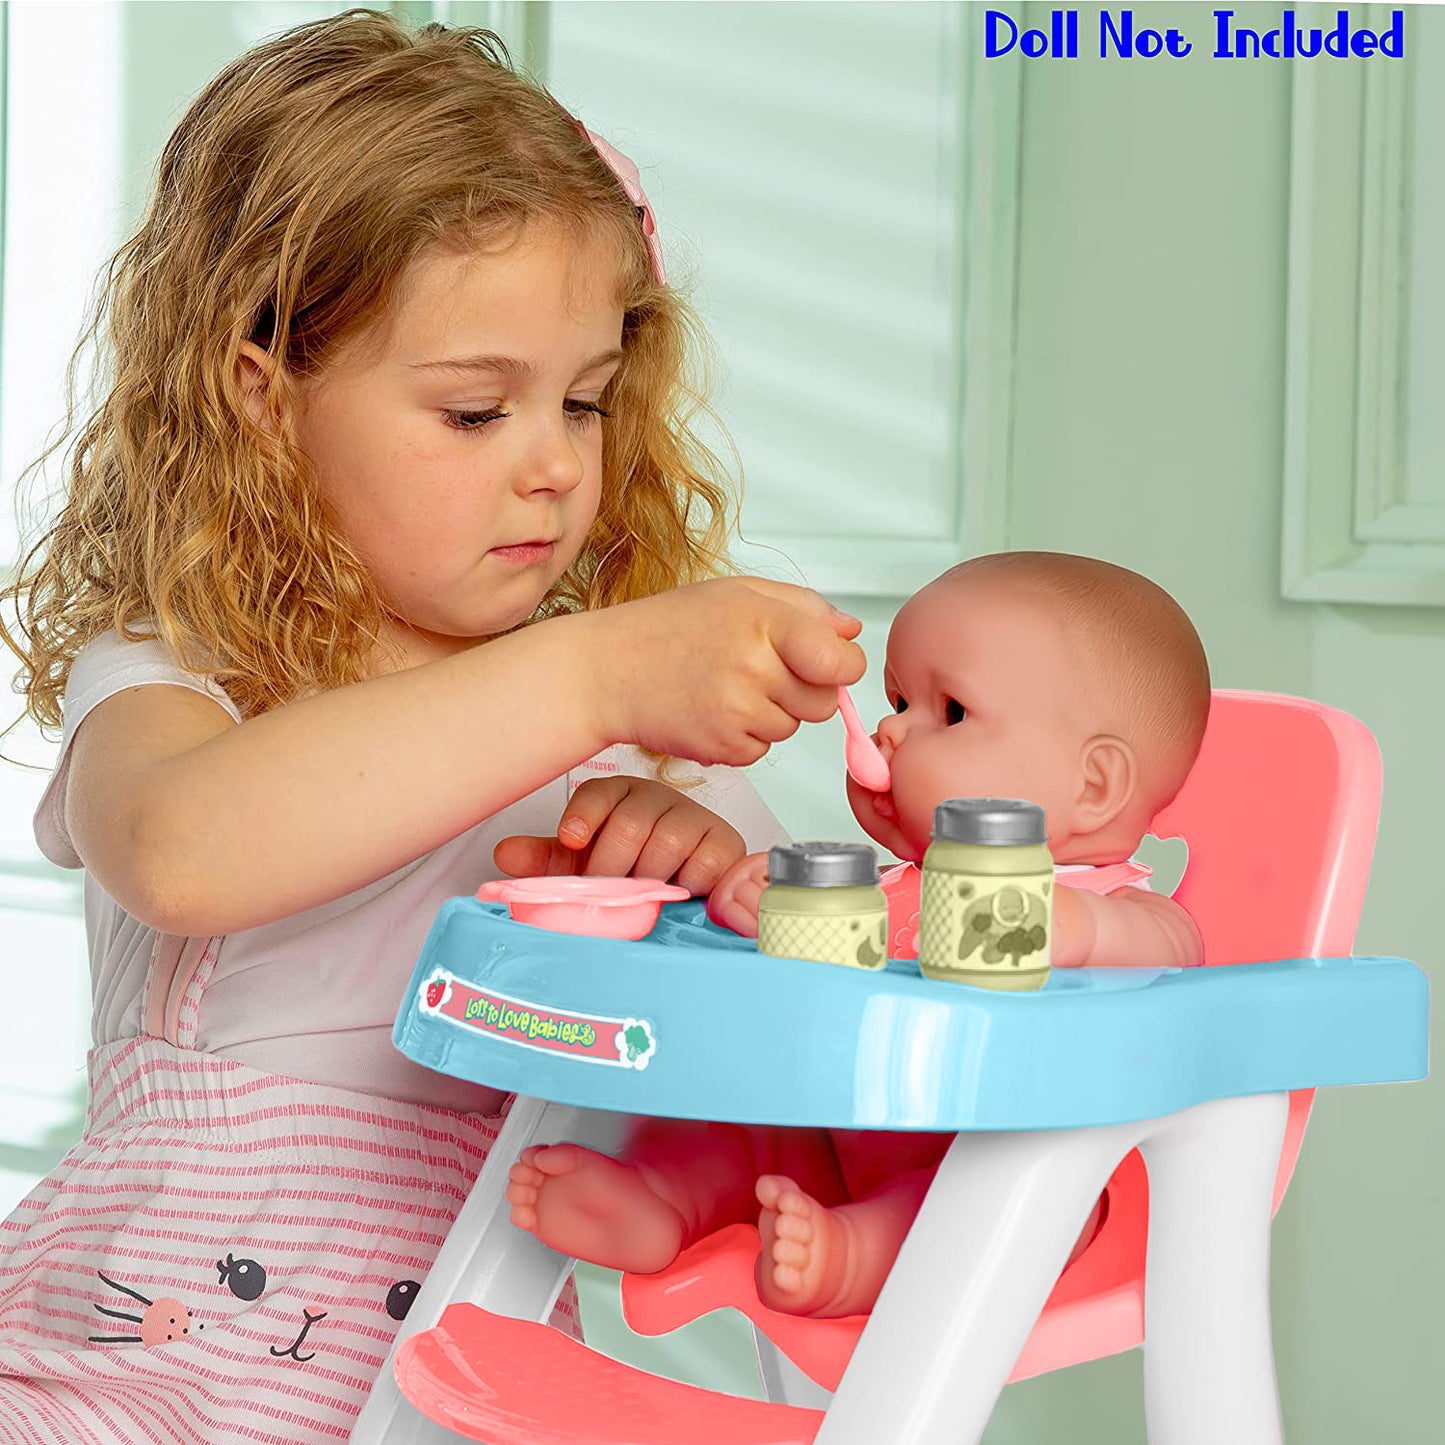 For Keeps! Highchair + Accessory Gift Set fits dolls up to 16” dolls - Ages 2+